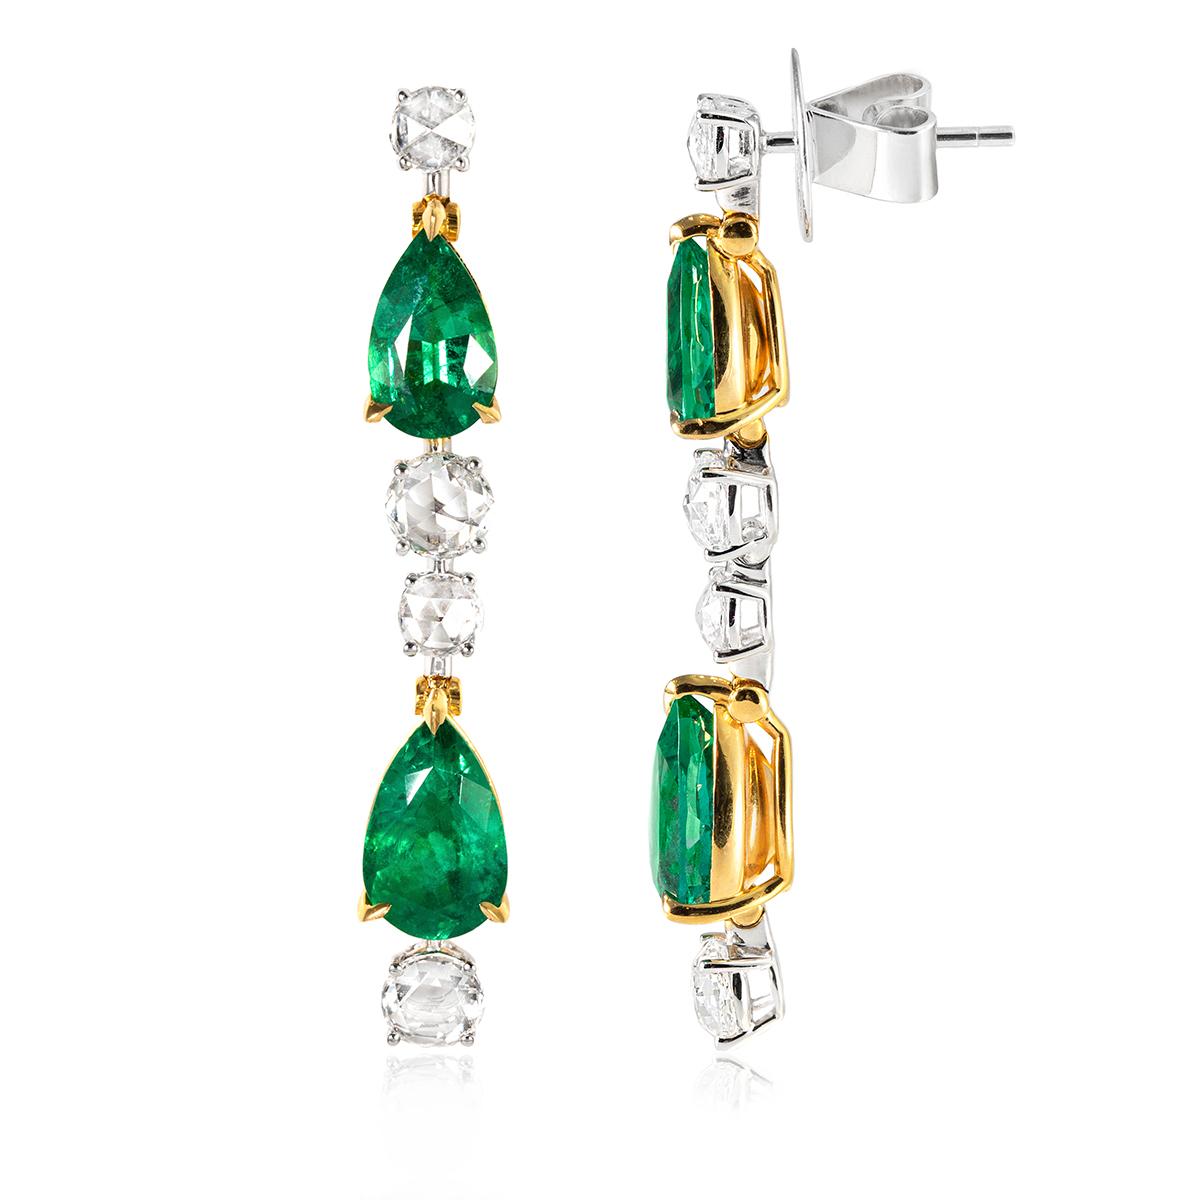 Natural Colombian pear shaped emerald and rose cut diamond drop earrings in 18ct yg/wg. They have post and butterfly fittings, the post attached to the top rose cut diamond. The earrings measure approximately 40mm in length.
4 pear shaped emeralds